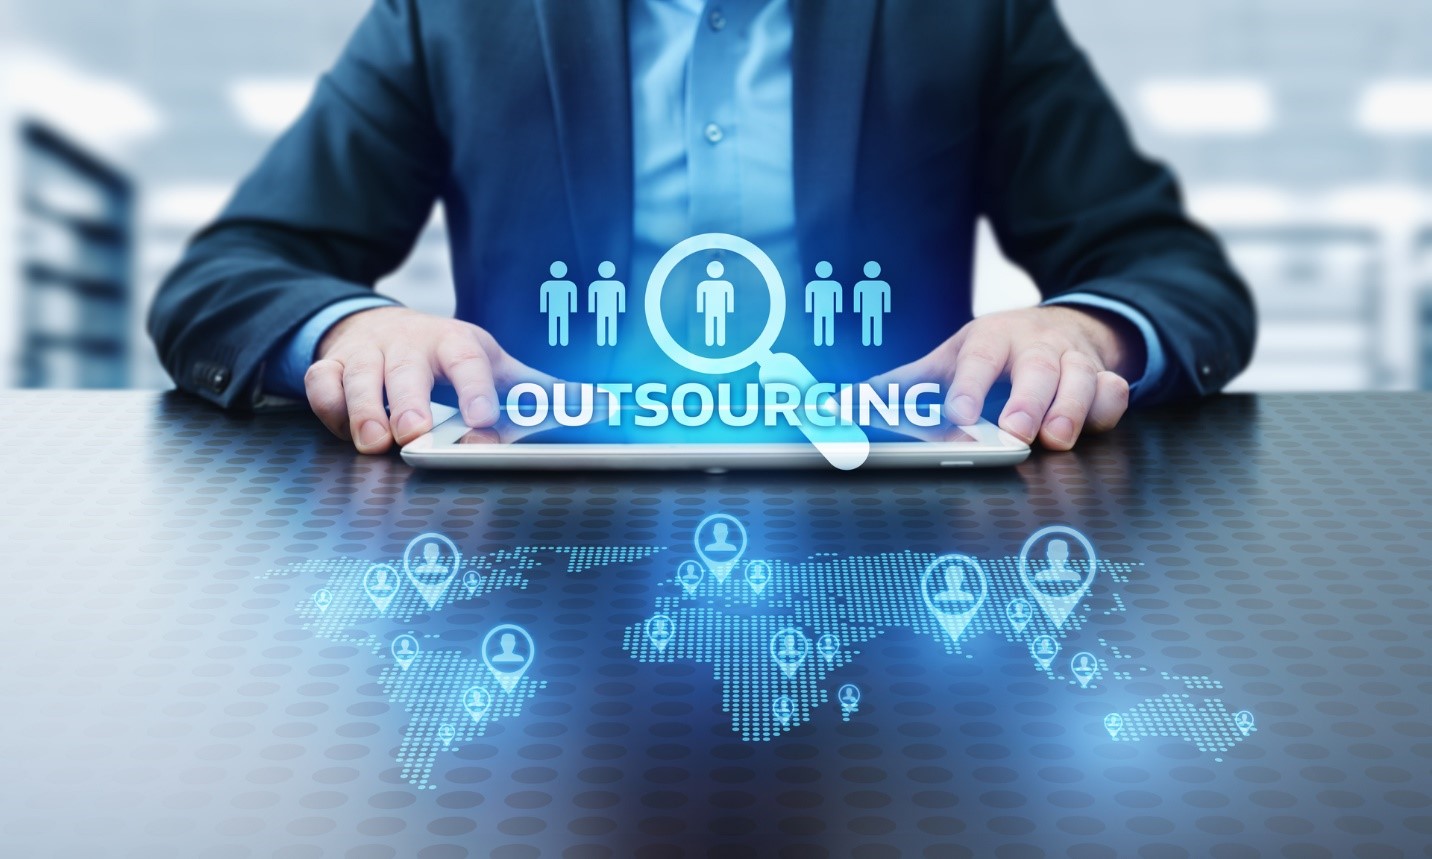 Outsourcing human resources can help businesses bridge temporary skills gaps.